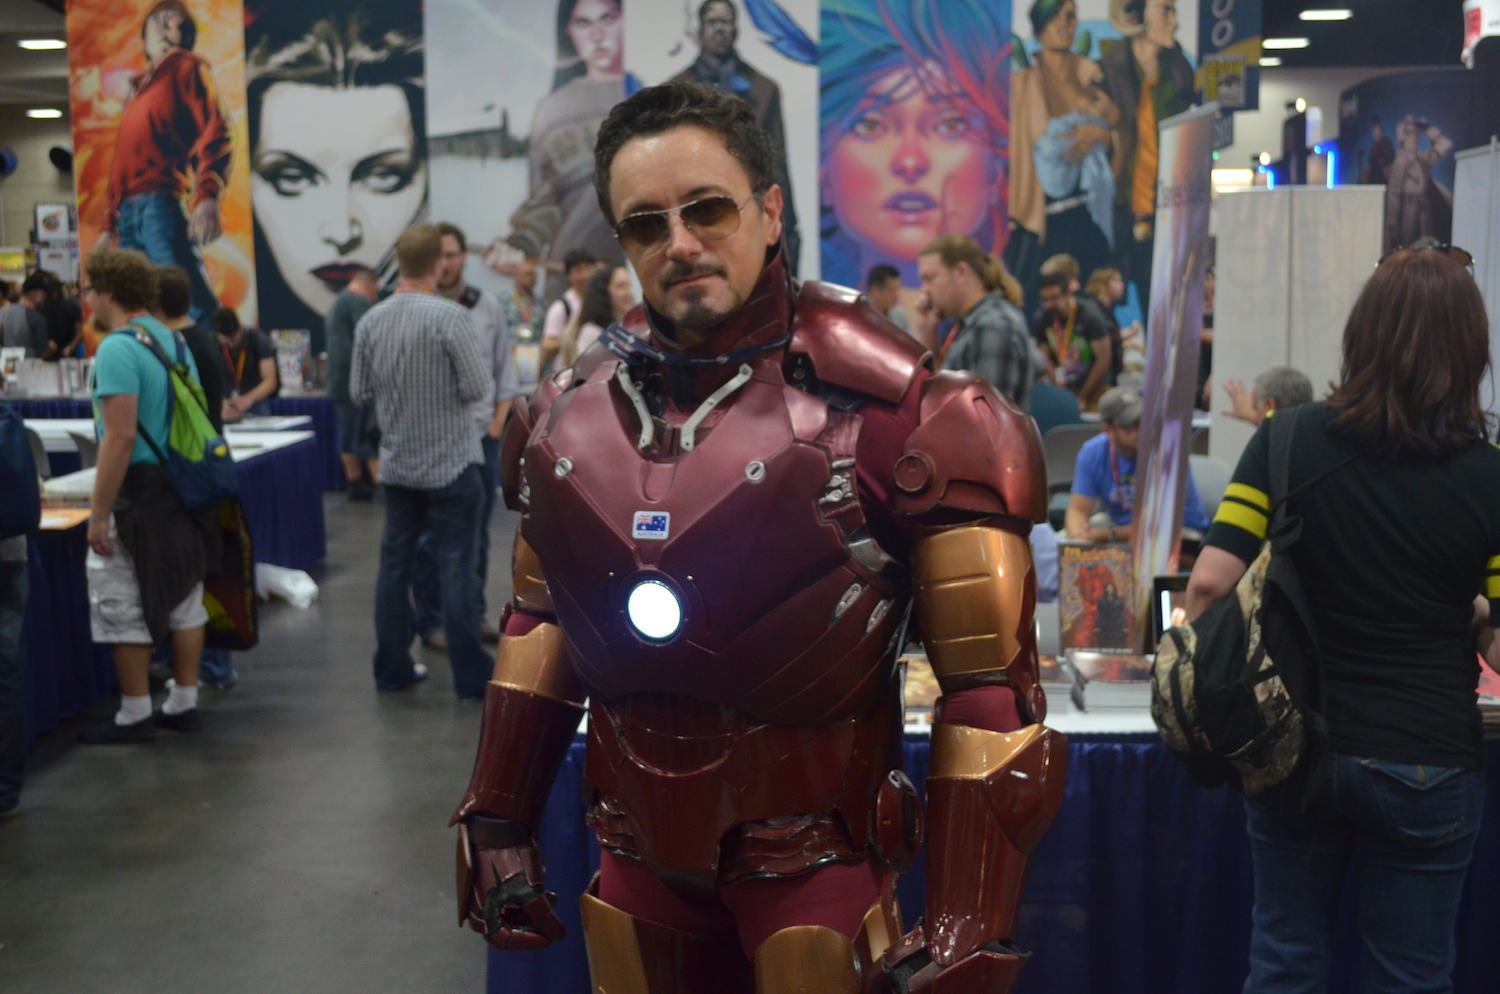 He probably would have been more happy with some guy in an rad Iron Man cos...